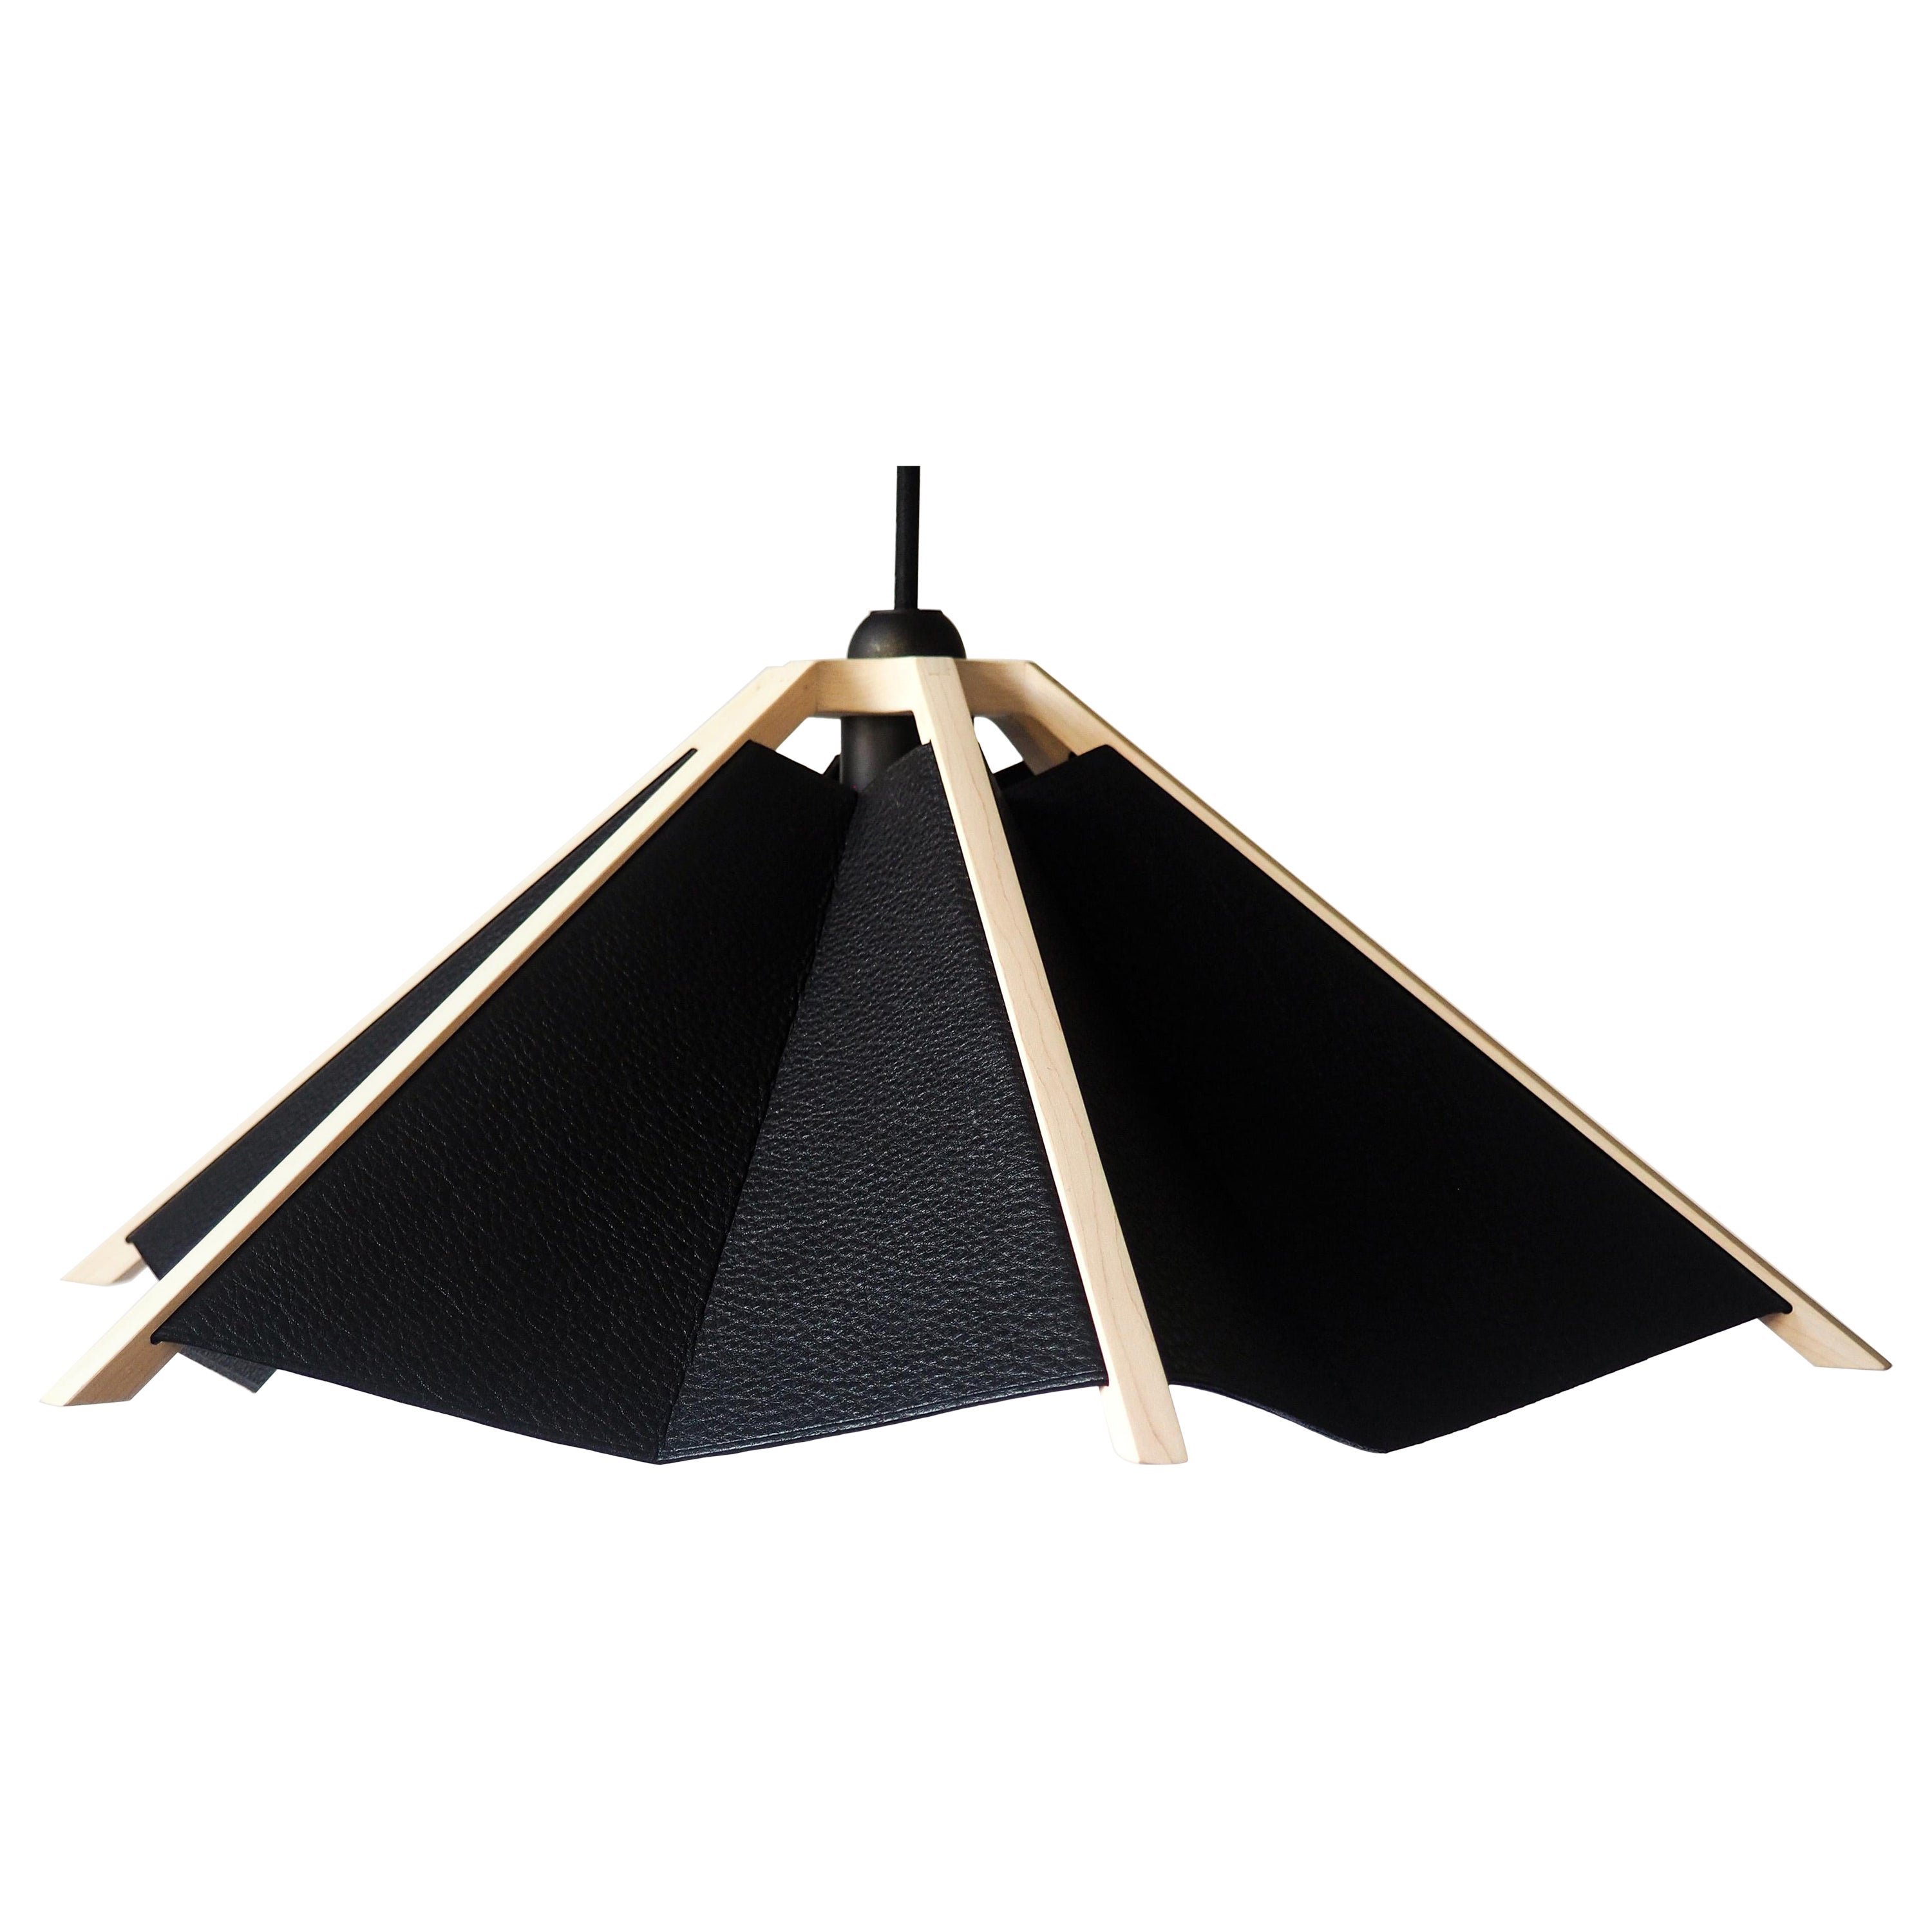 "The Hanging Garden" Wood & Leather Lampshade